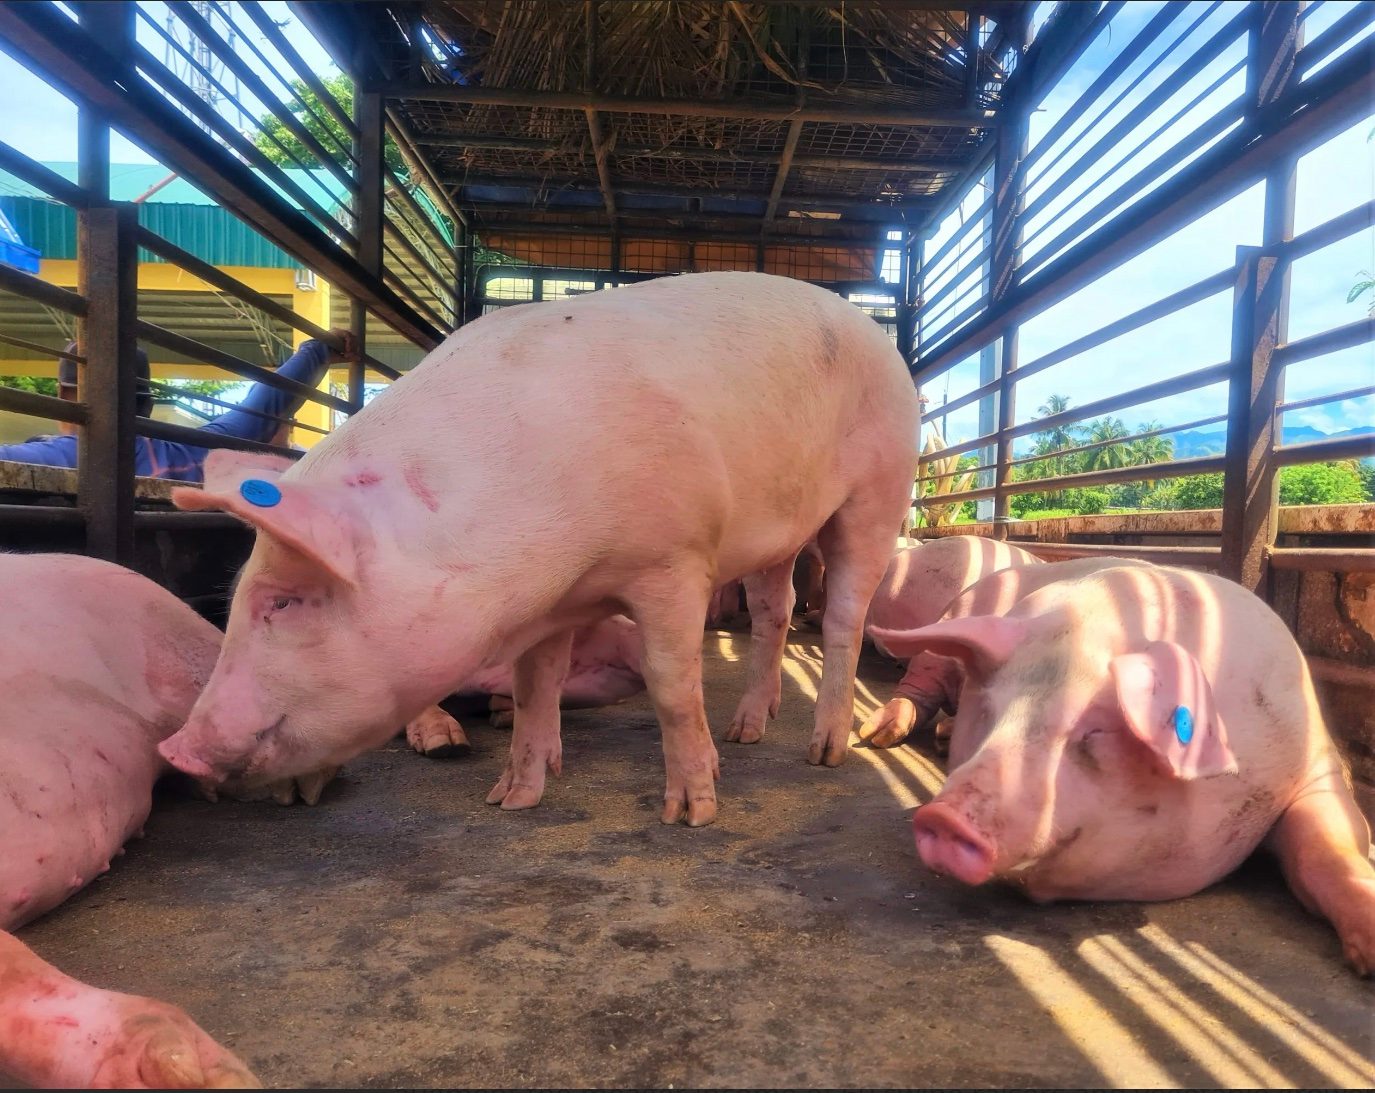 Pork shortage feared amid culling of hogs to contain African swine fever